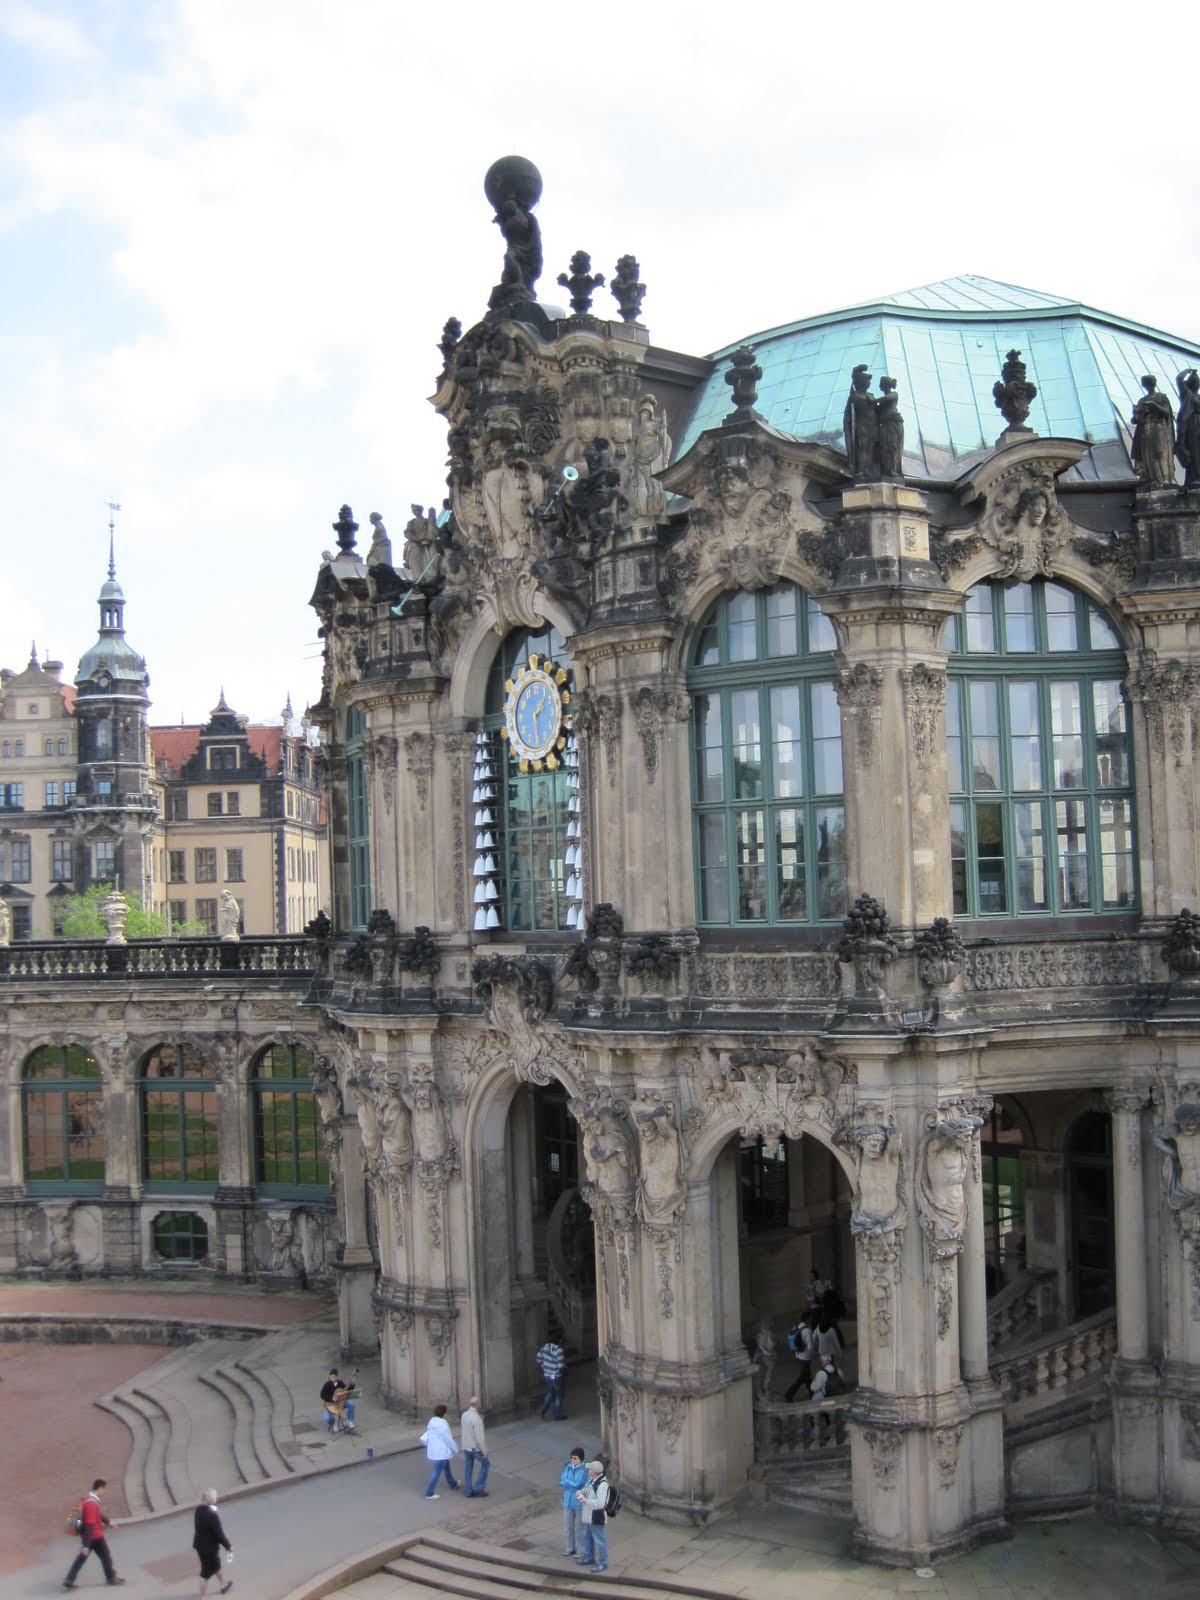 Studying in Germany: Dresden